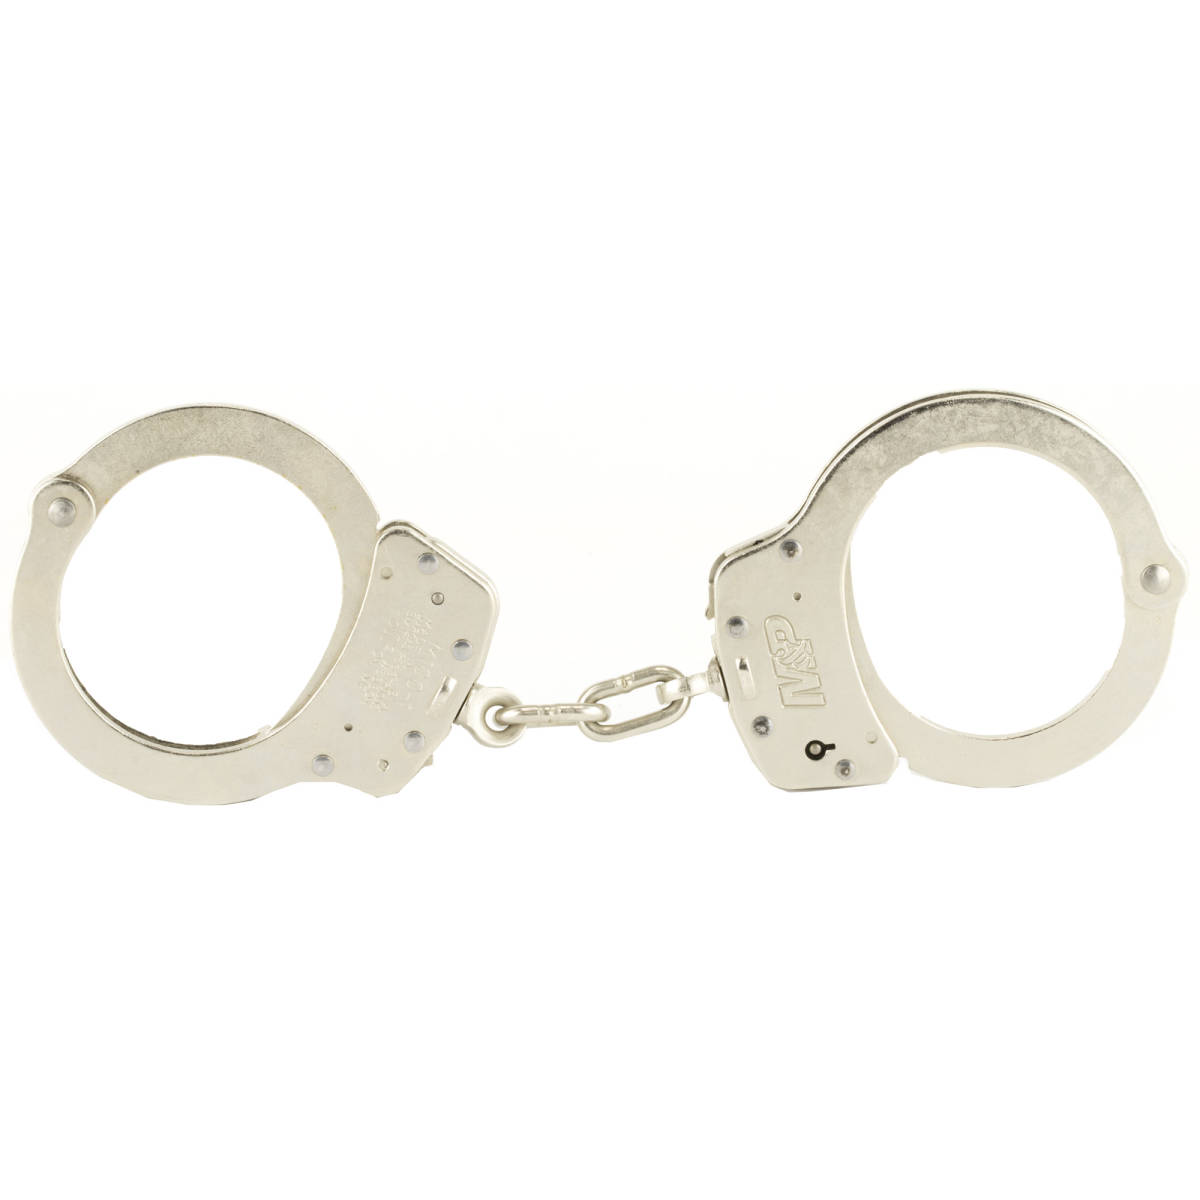 LESW 350122 100 MP LVRLCK HANDCUFFS NKL LE-img-0